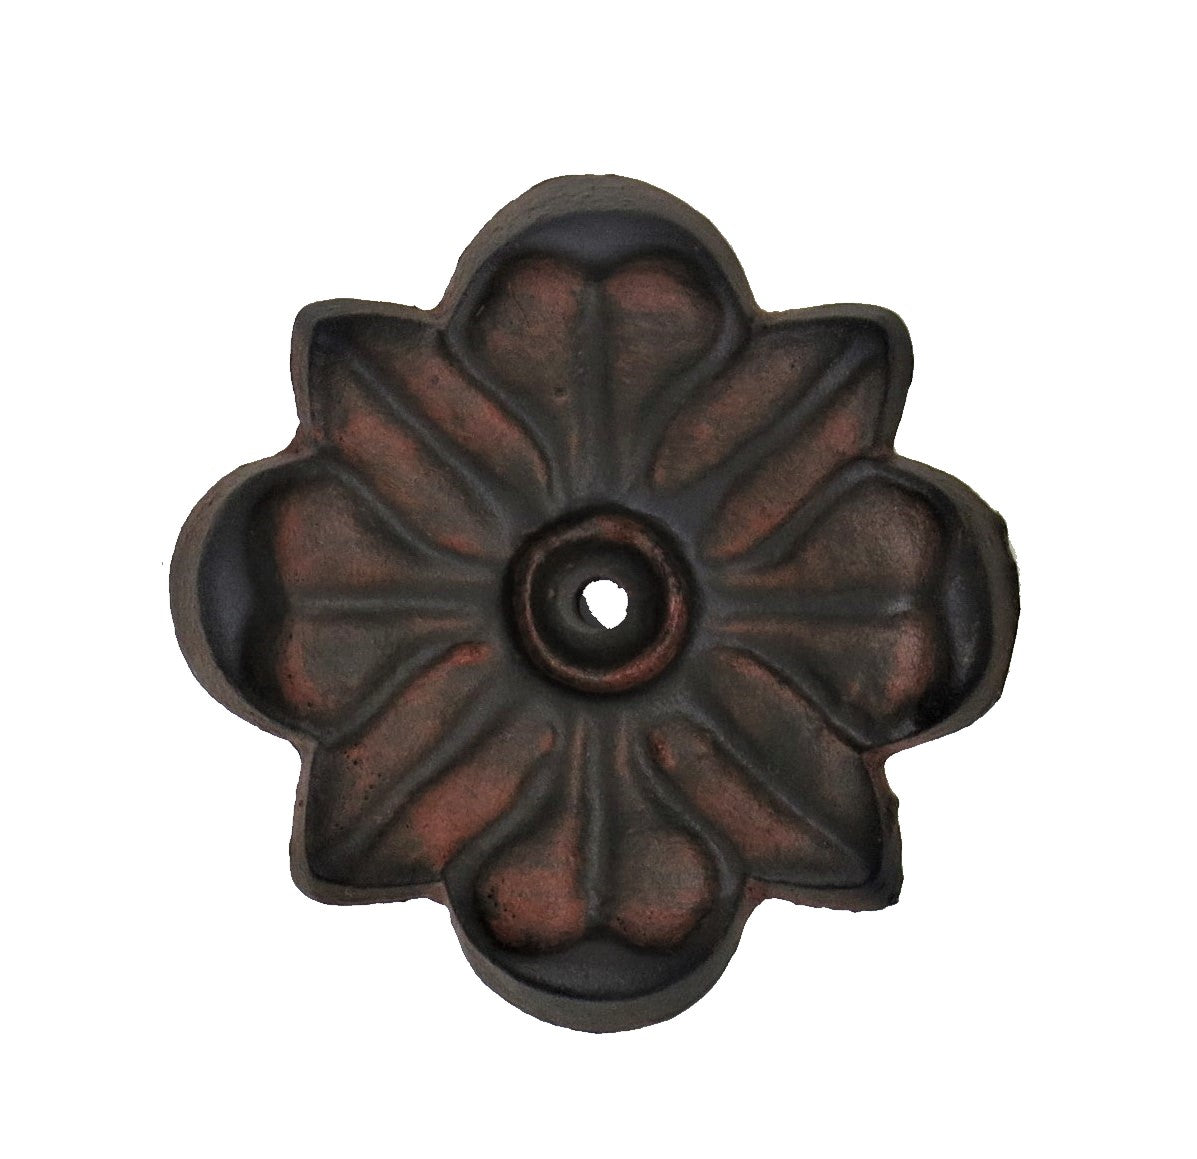 Load image into Gallery viewer, Floral Iron Rosette
